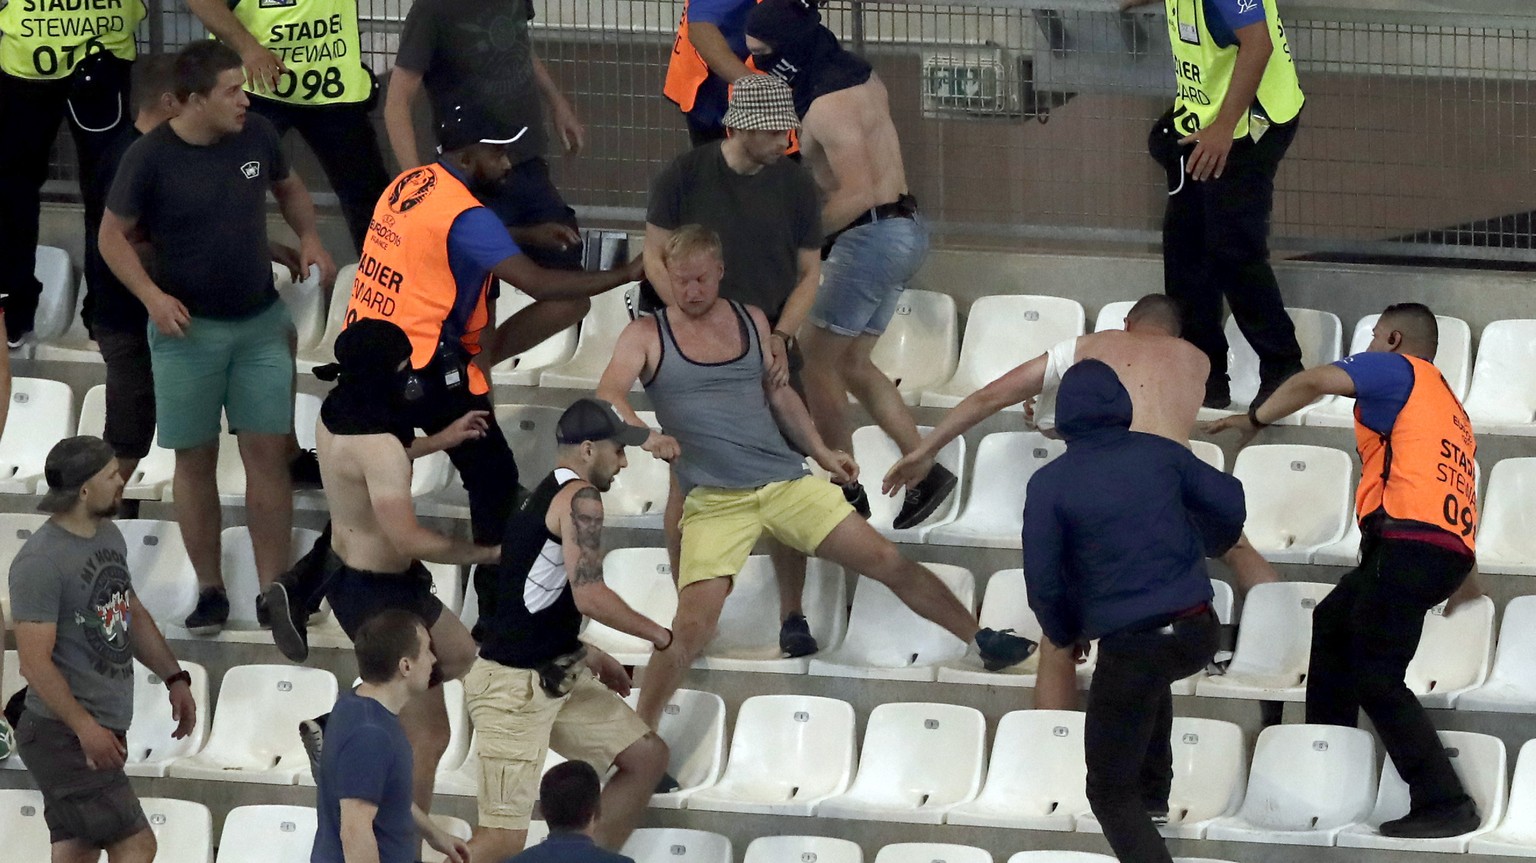 Supporters and stewards clash in the stands after the Euro 2016 Group B soccer match between England and Russia at the Velodrome stadium in Marseille, France, Saturday, June 11, 2016. (AP Photo/Ariel  ...